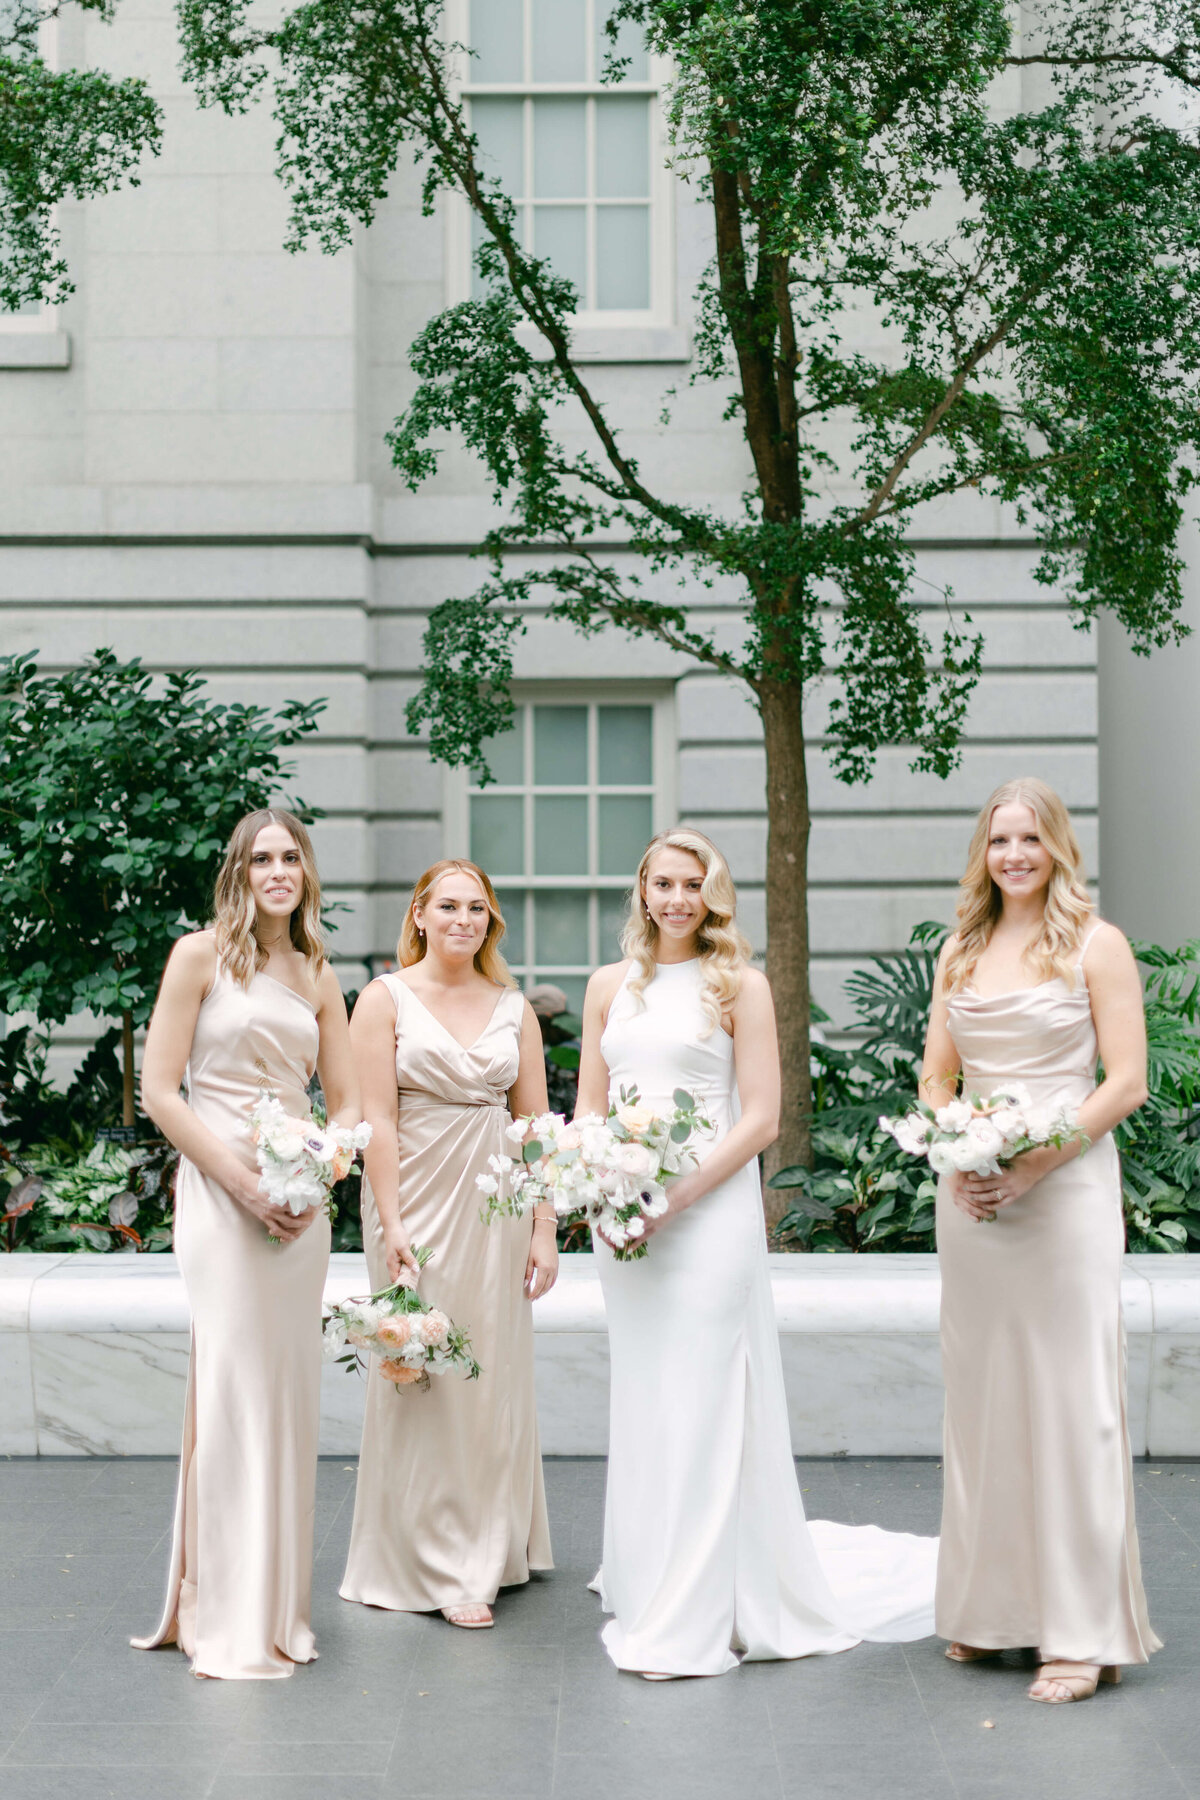 A bride stands with her bridesmaids.